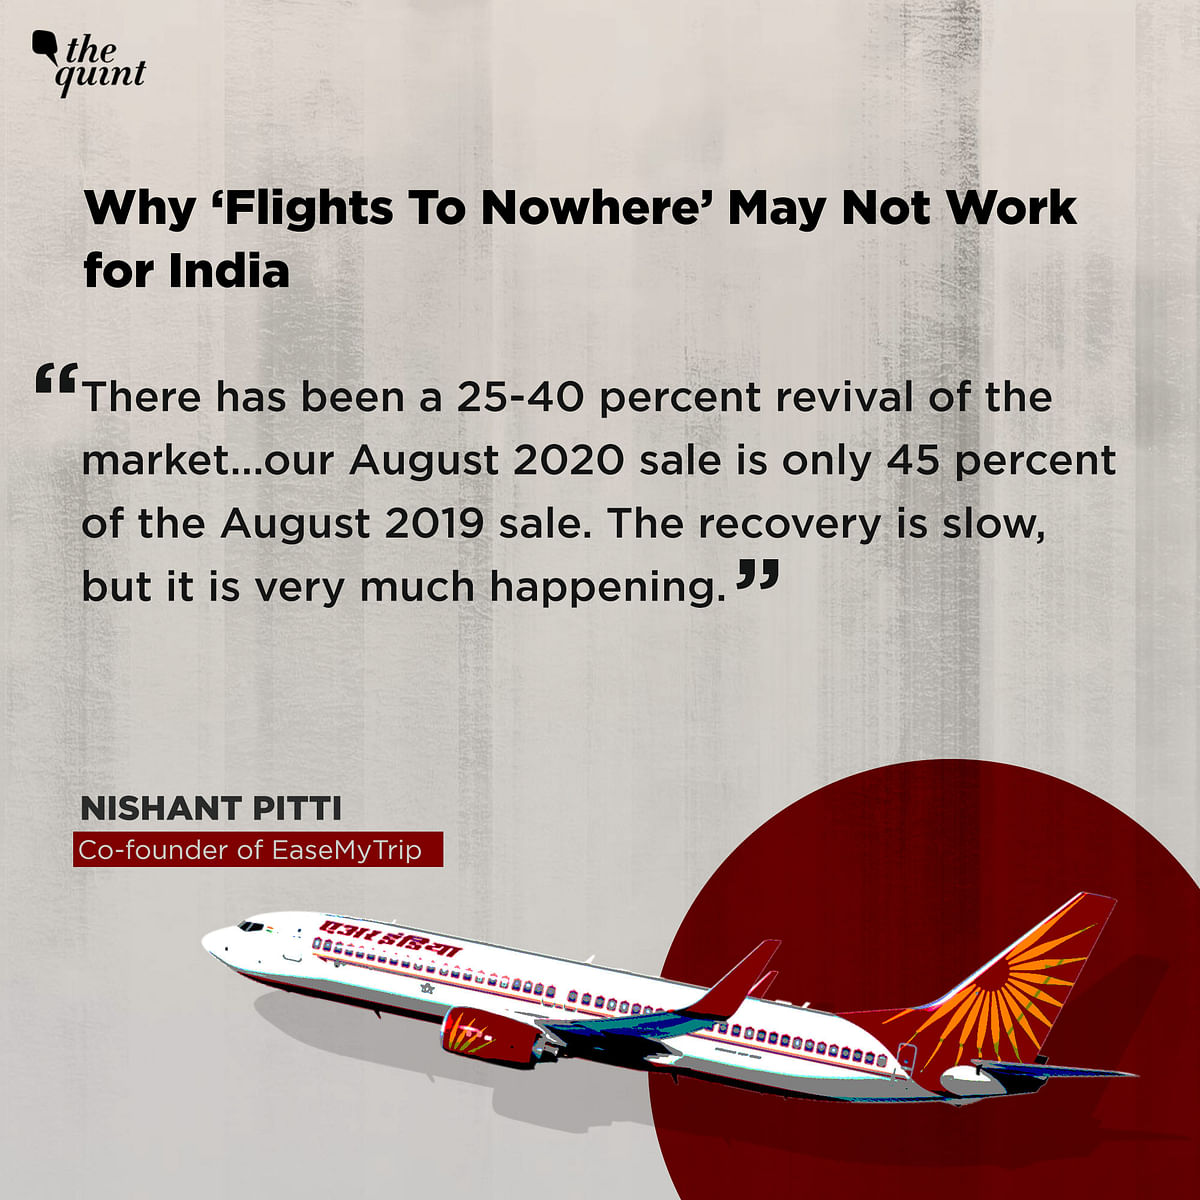 These flights would take passengers  to nowhere – meaning, flights would take off and land in the same airport.